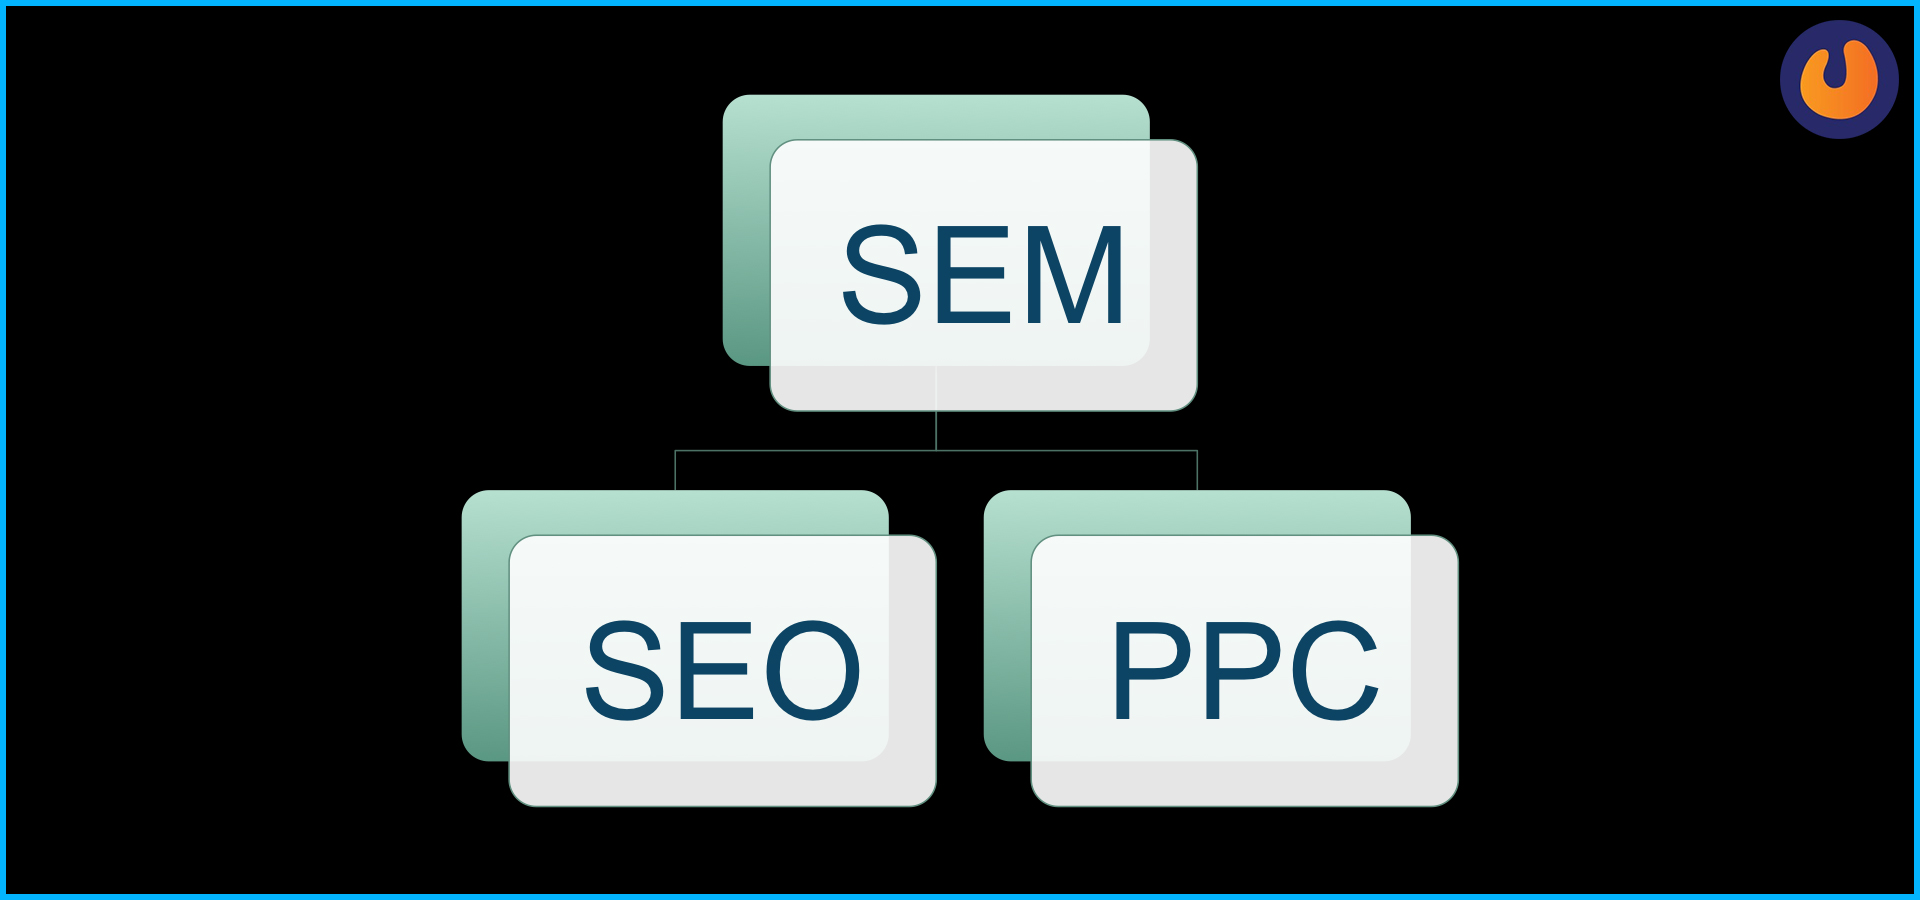 difference between SEO, SEM, and PPC